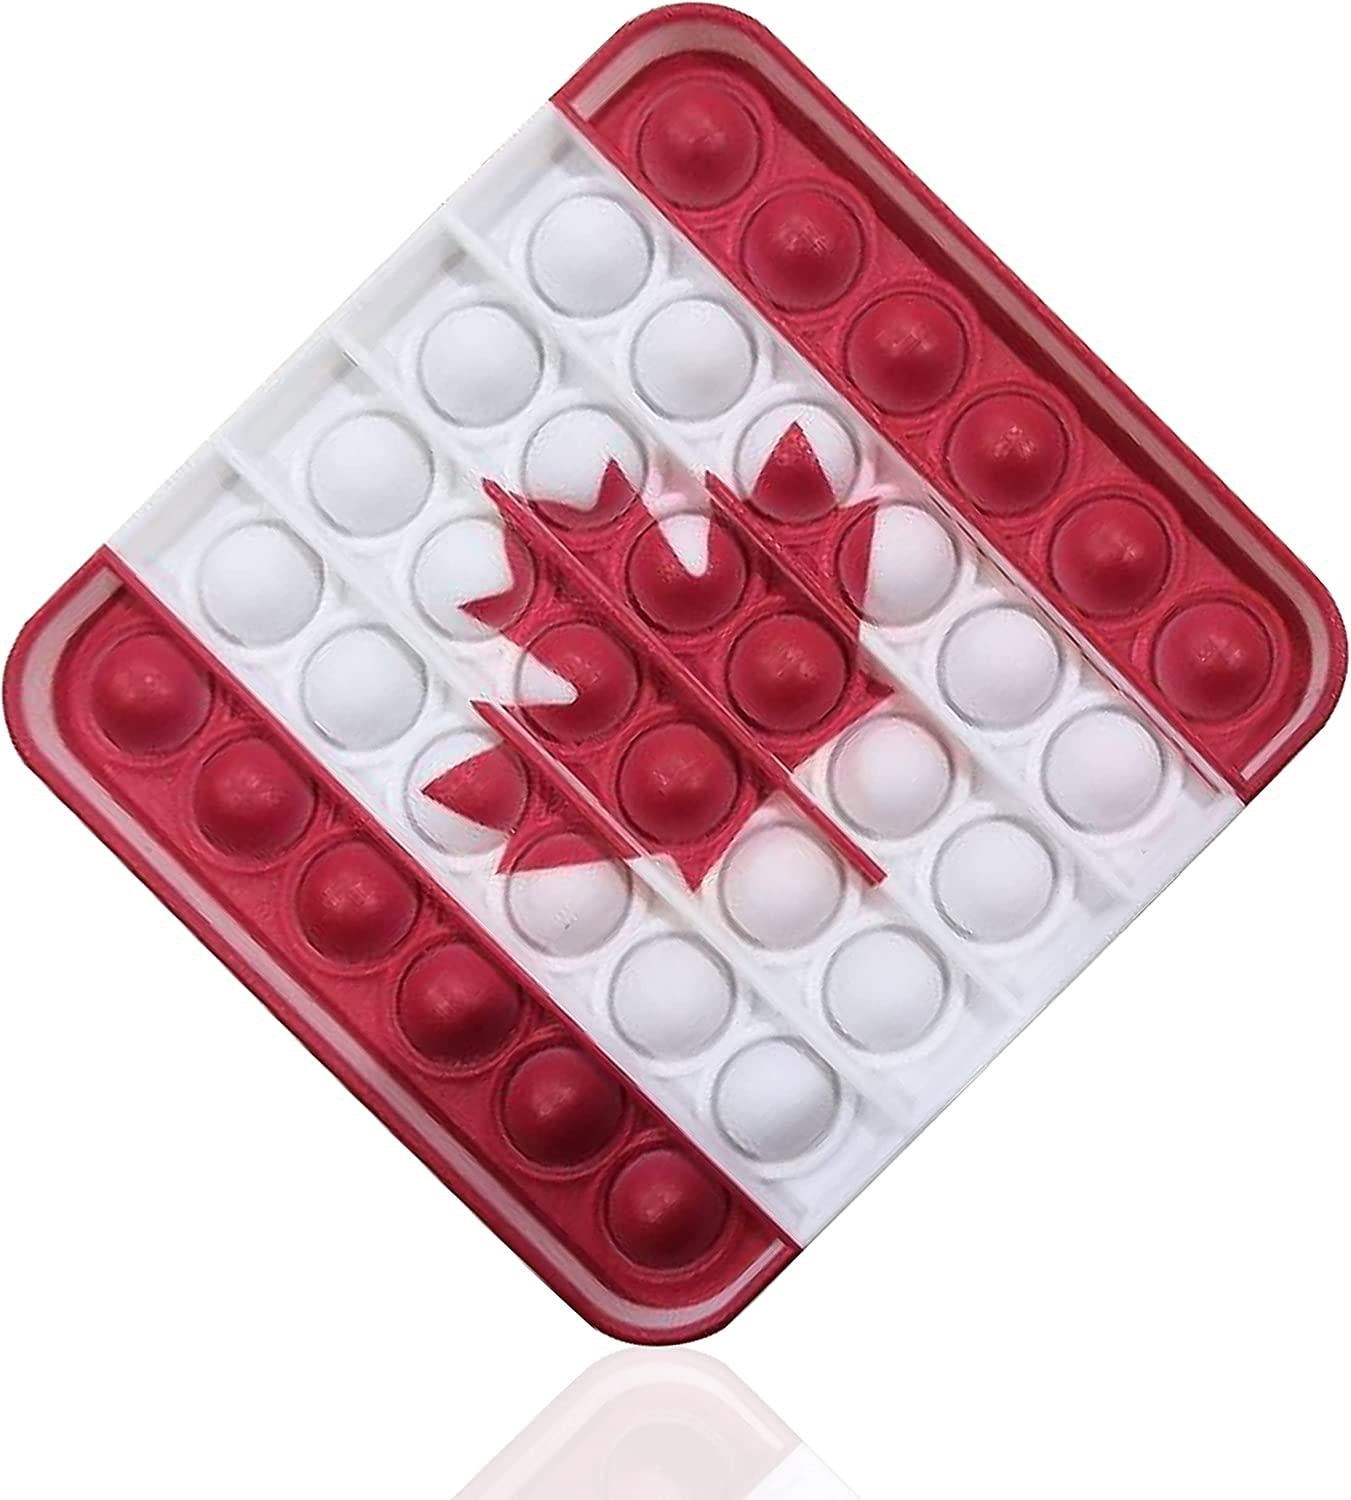 MaiZon Unlimited, MaiZon Unlimited Bubble POPIT Fidget, Sensory Bubble Toys Autism,Anxiety,ADHD,Special Needs for Adults and Kids- Original Canadian National Flag